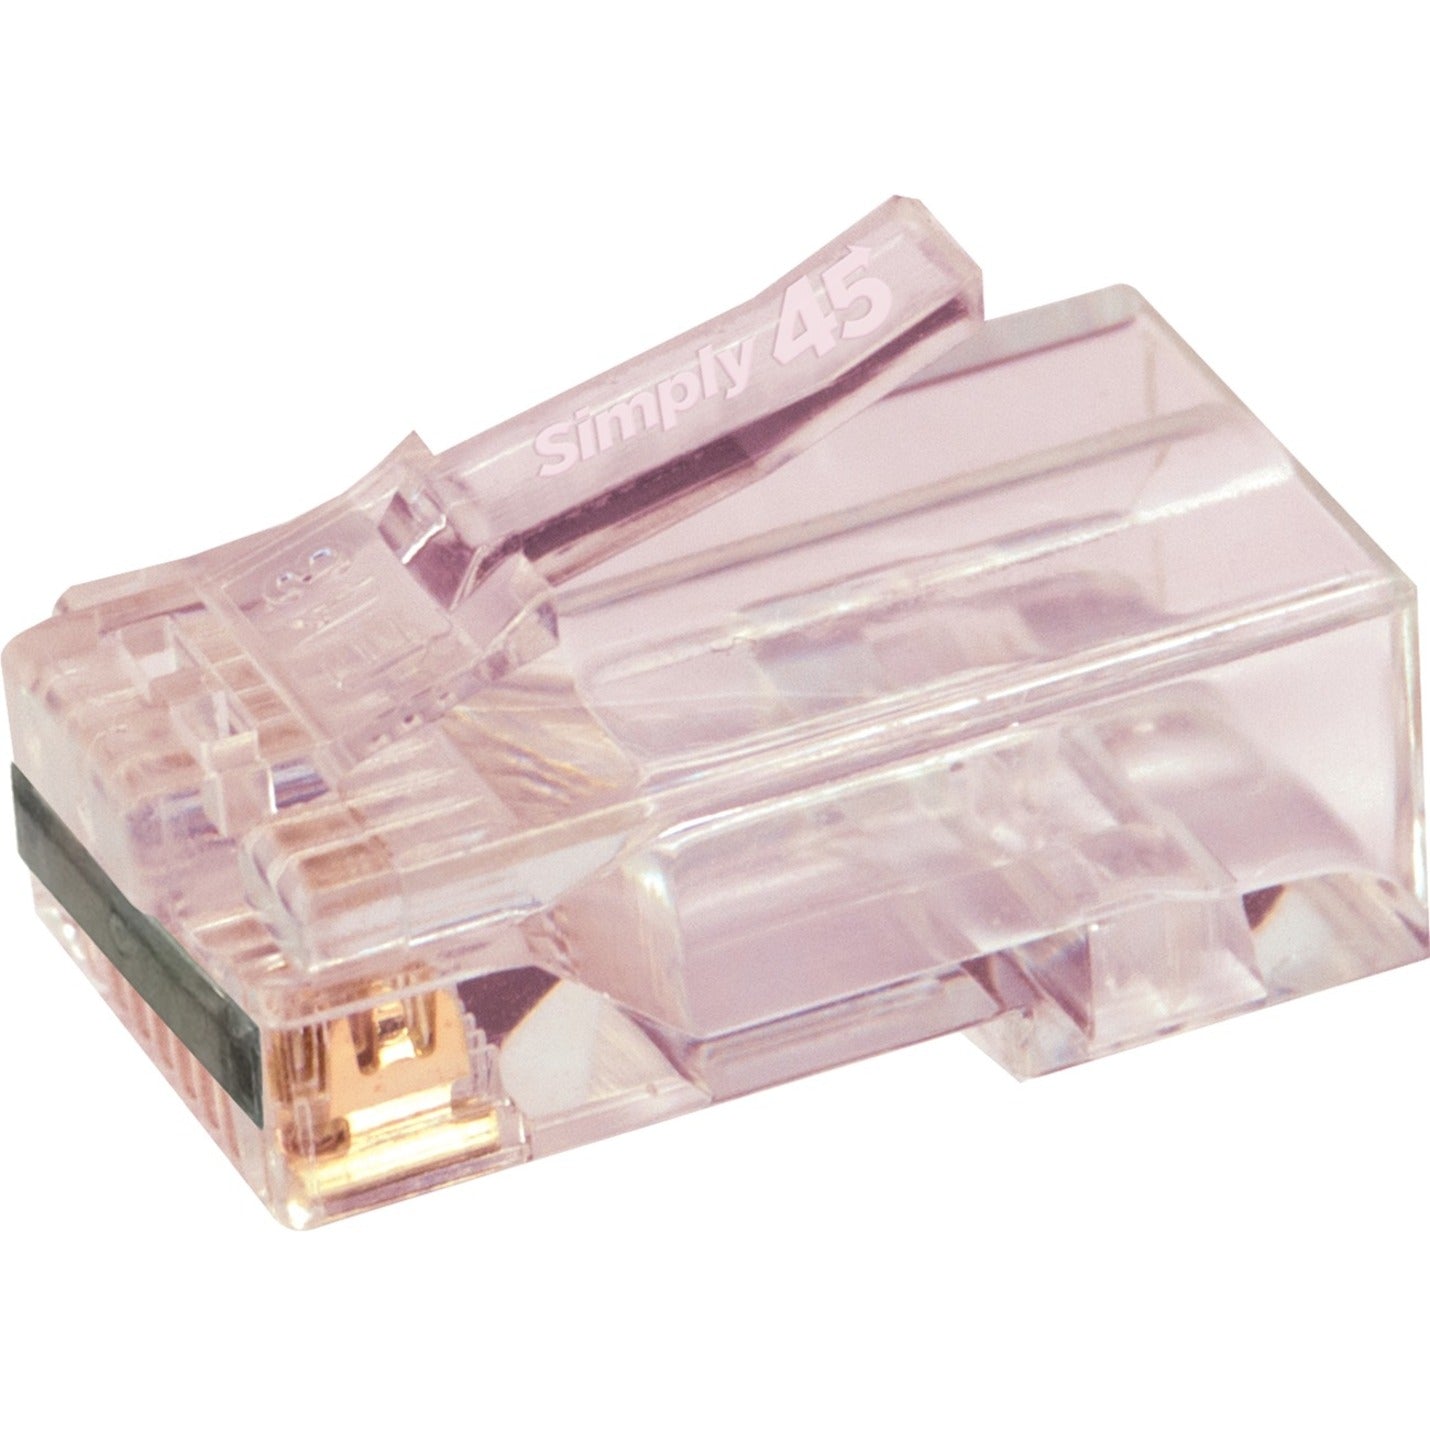 SIMPLY45 S45-1700P ProSeries Cat6/6a Unshielded Pass Through RJ45 with Cap45, PoE, Fire Resistant, Stranded, Crosstalk Protection